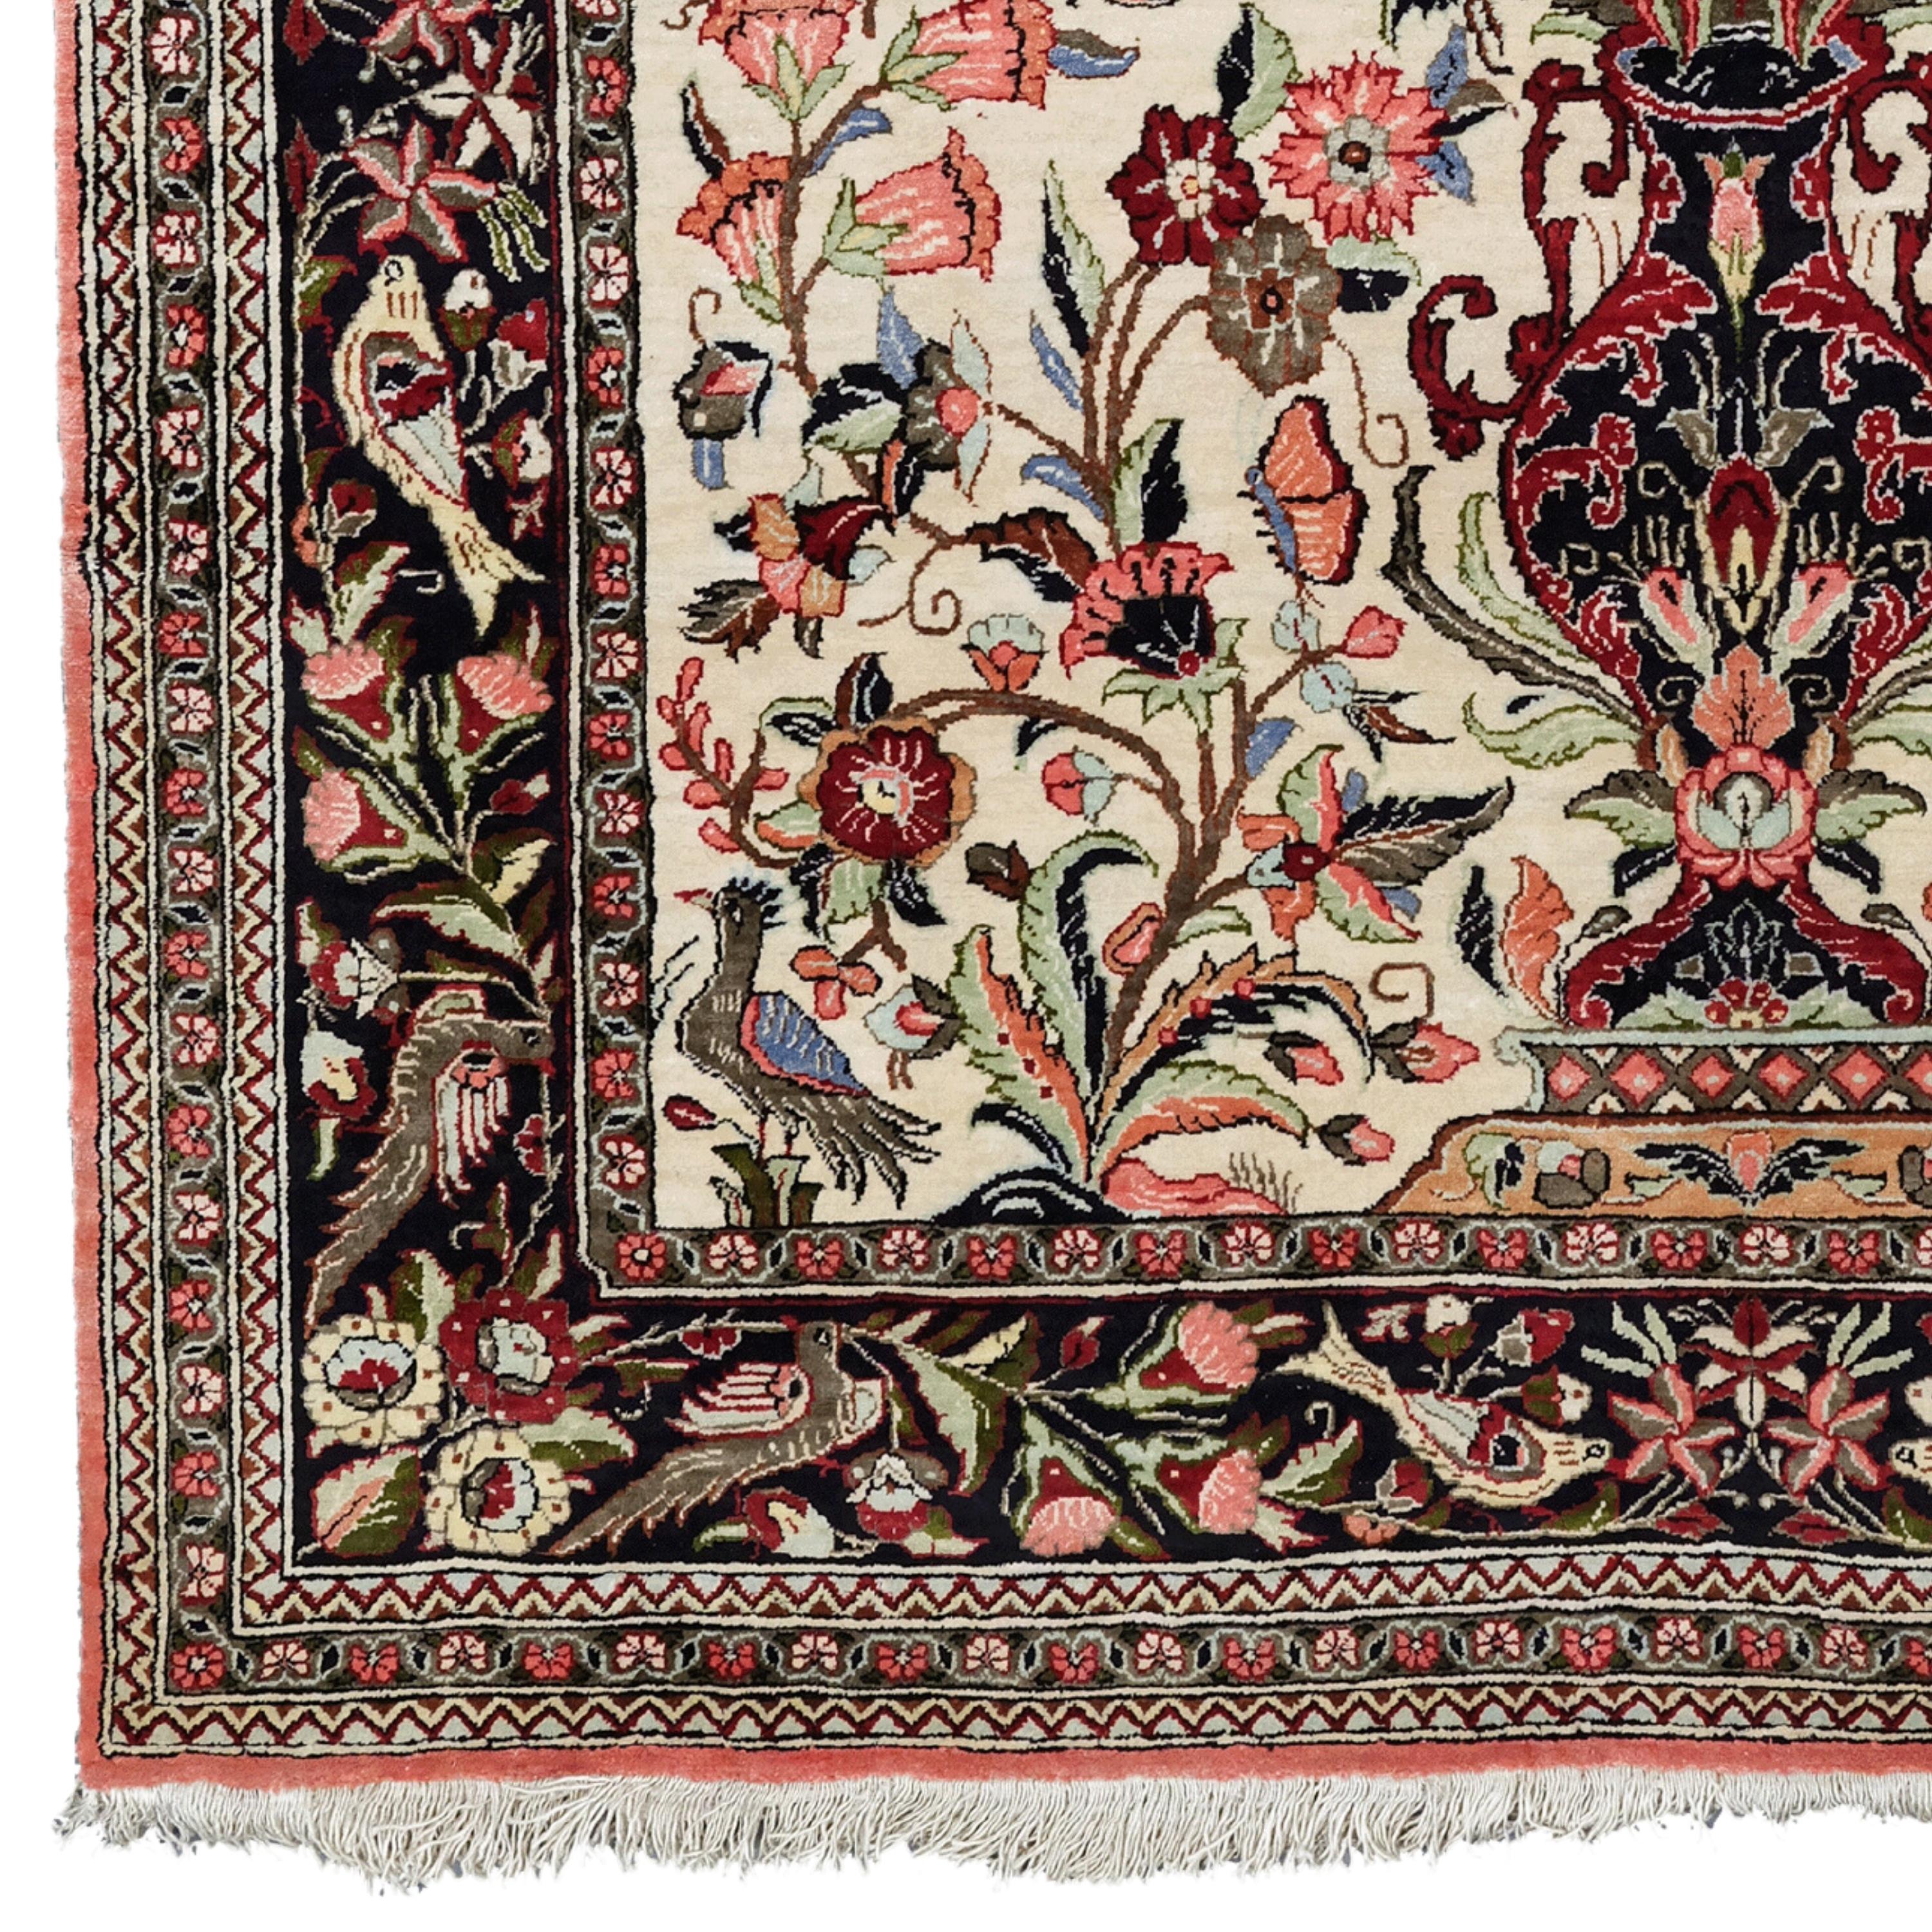 19th Century Silk Qum Rug

This magnificent 19th-century antique Qum (Gohm) rug is a testament to the unparalleled craftsmanship of its age. Every intricate detail woven into this masterpiece tells a story of ancient art and traditions. This carpet,